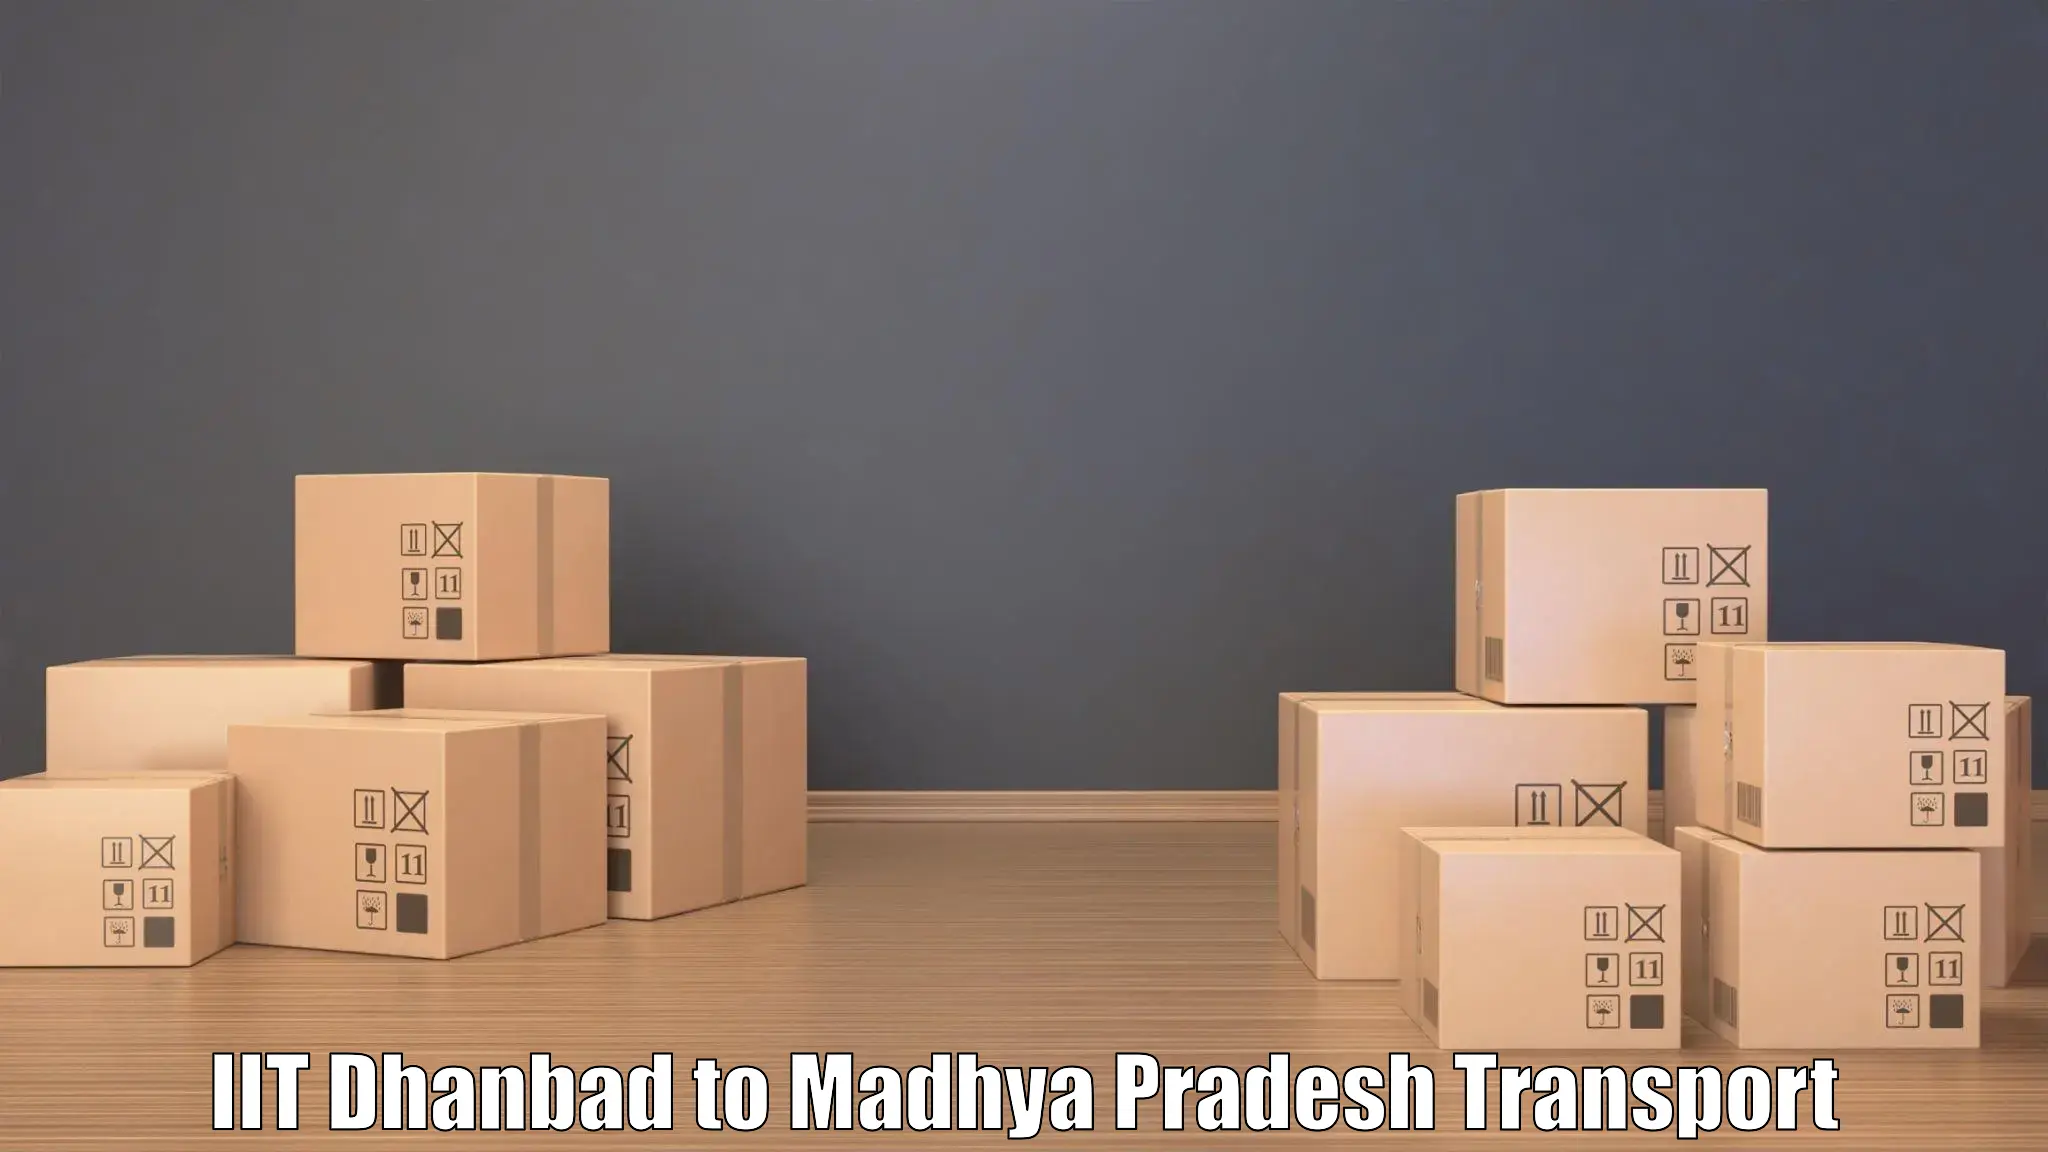 Commercial transport service IIT Dhanbad to Kesali